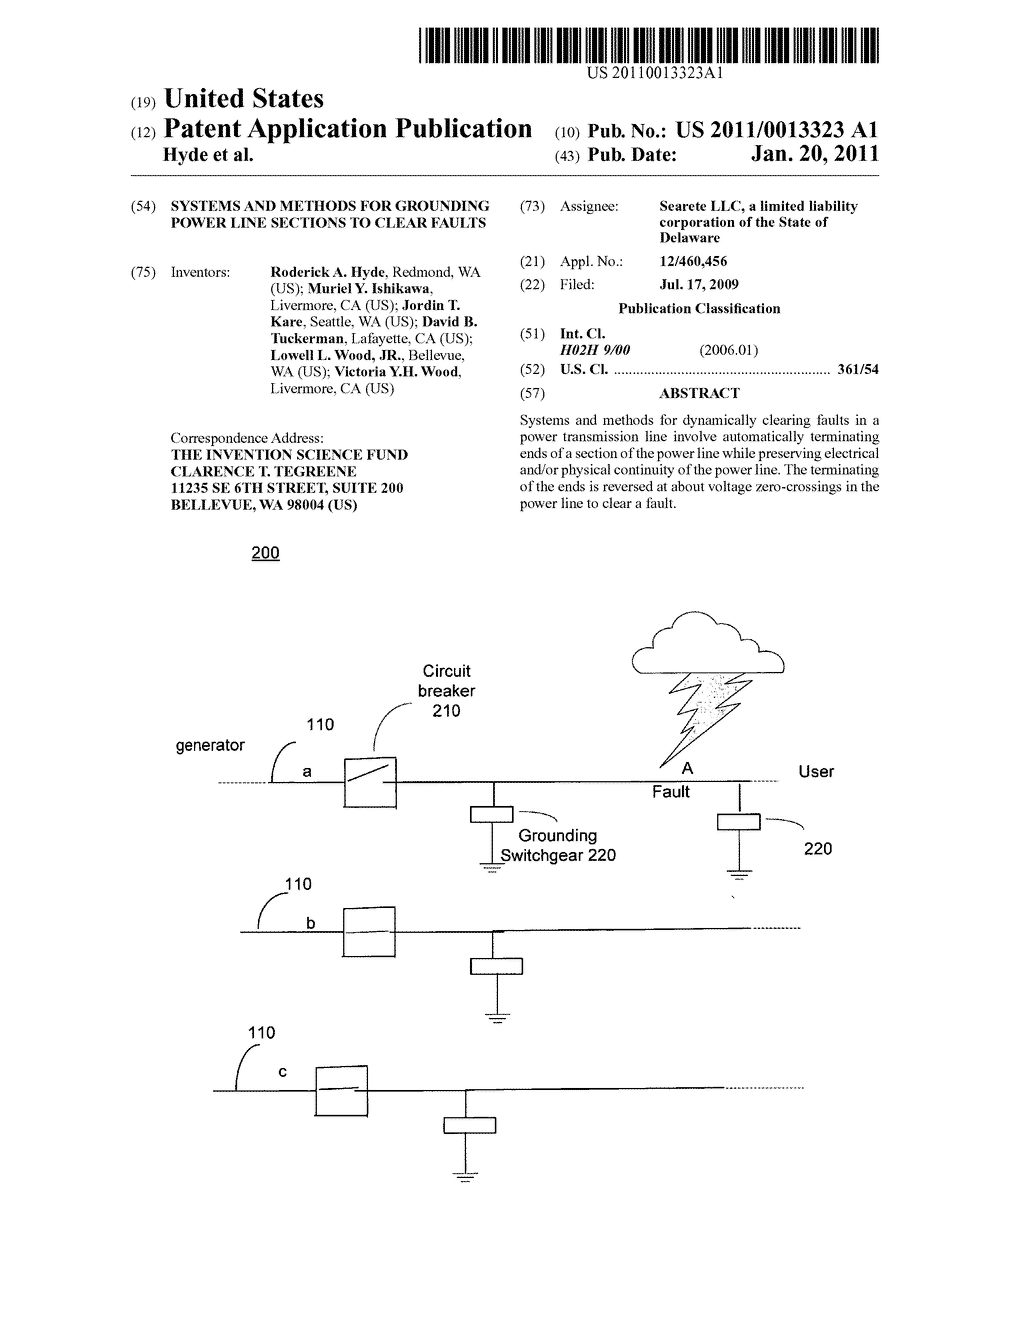 Systems and methods for grounding power line sections to clear faults - diagram, schematic, and image 01